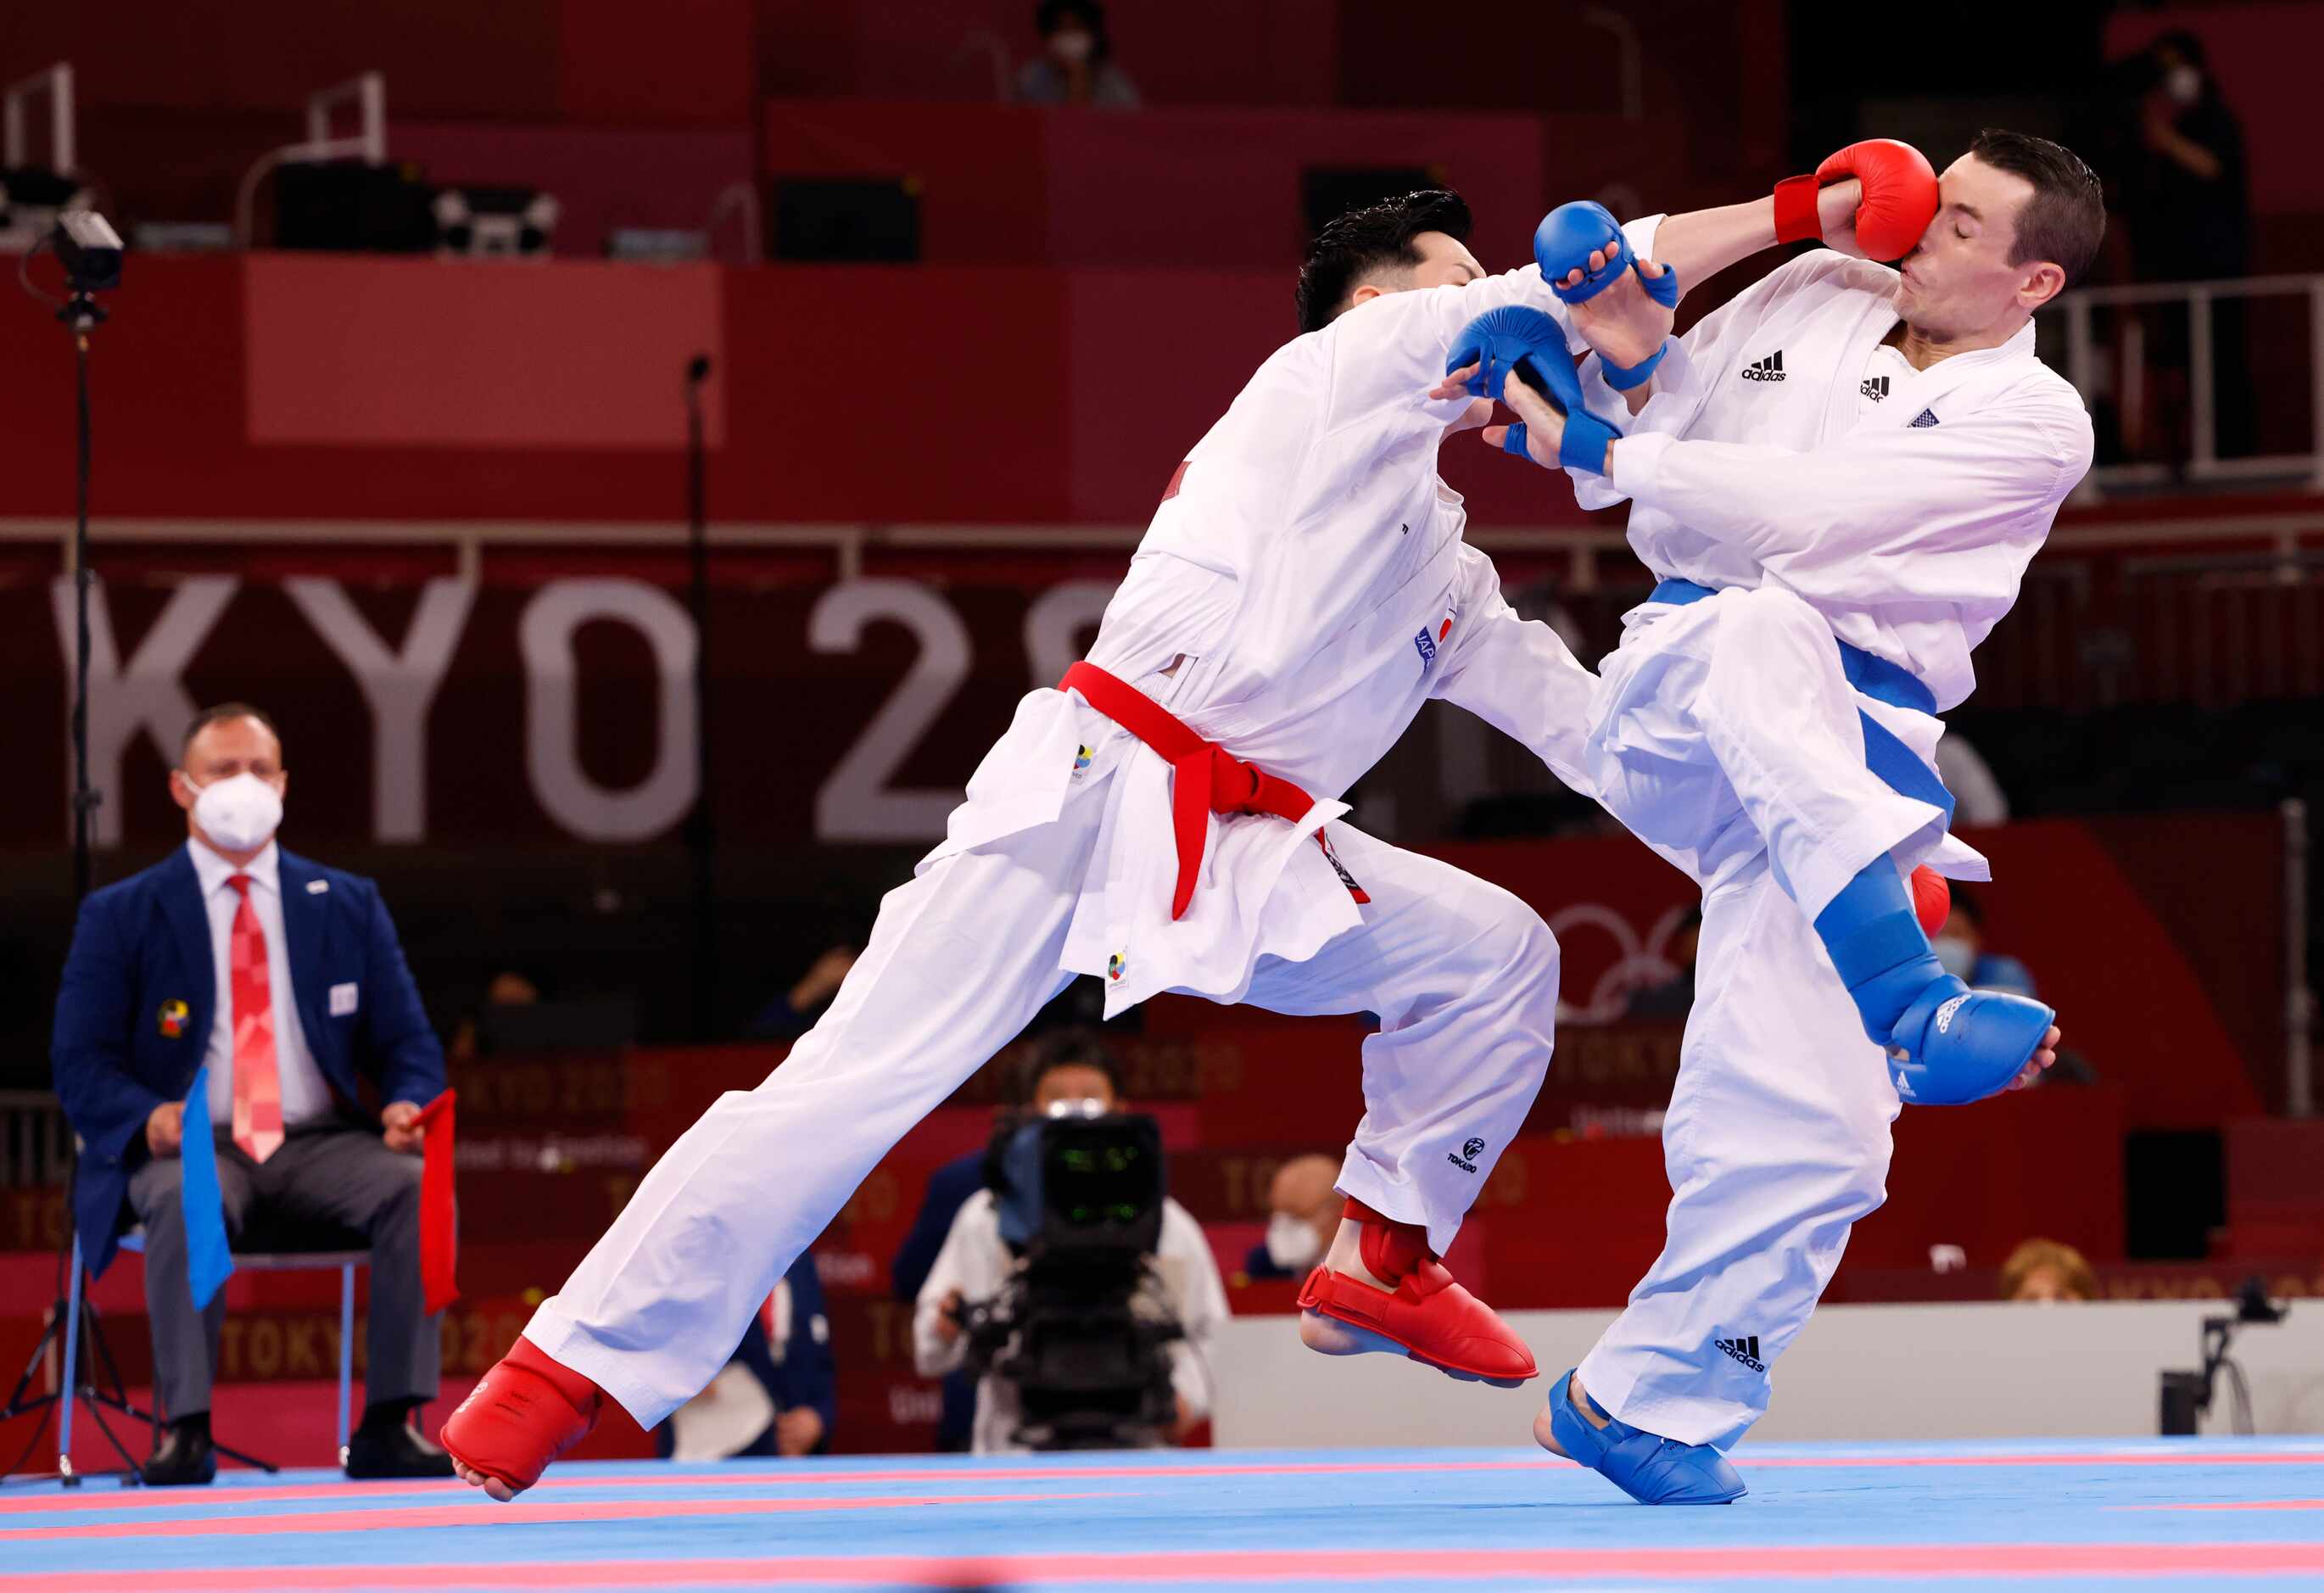 USA’s Tom Scott is hit in the face by Japan’s Ken Nishimura during the karate men’s kumite...